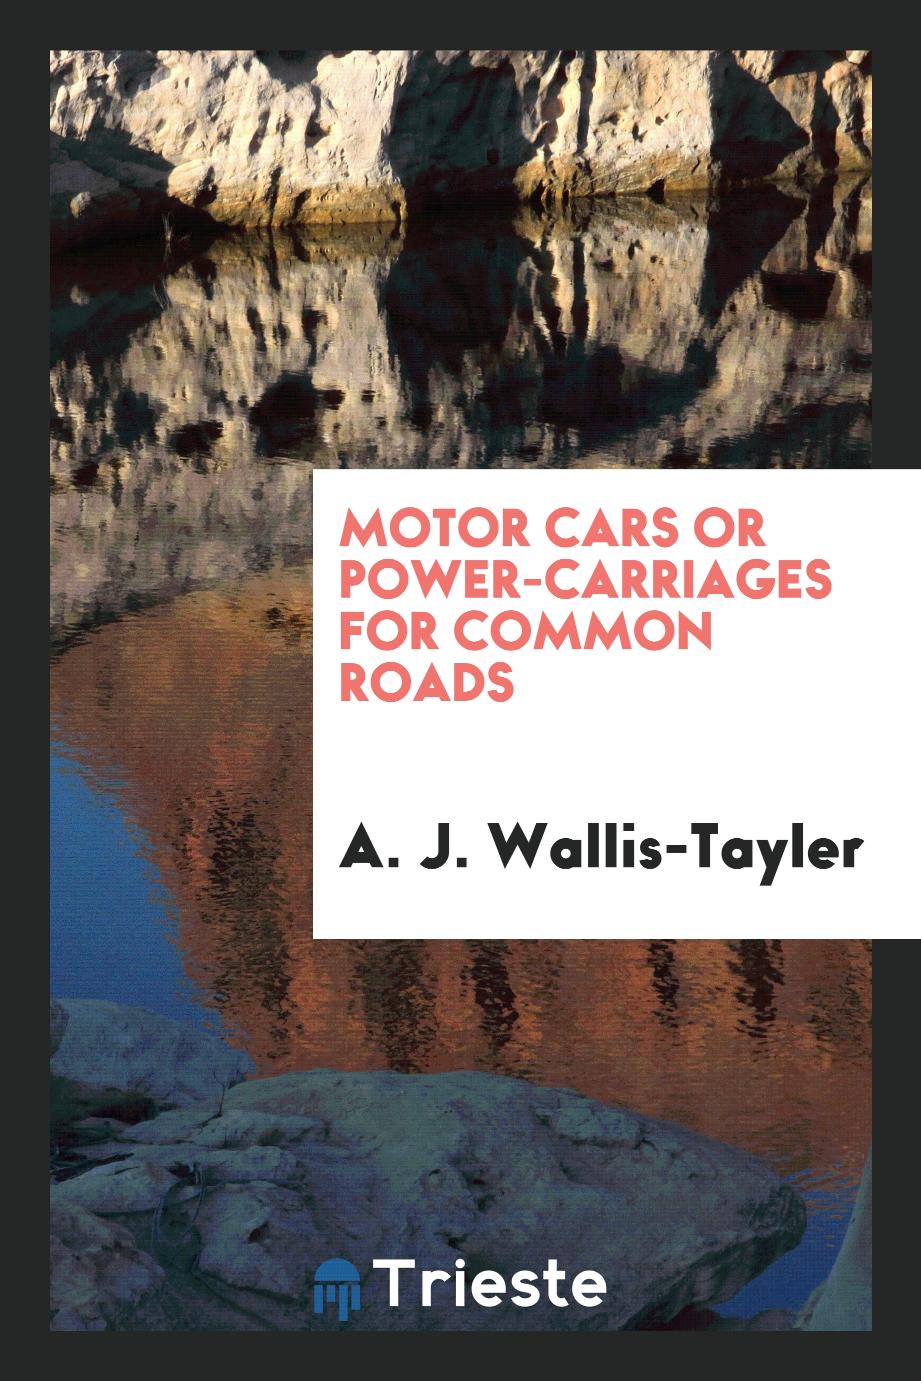 Motor Cars or Power-Carriages for Common Roads